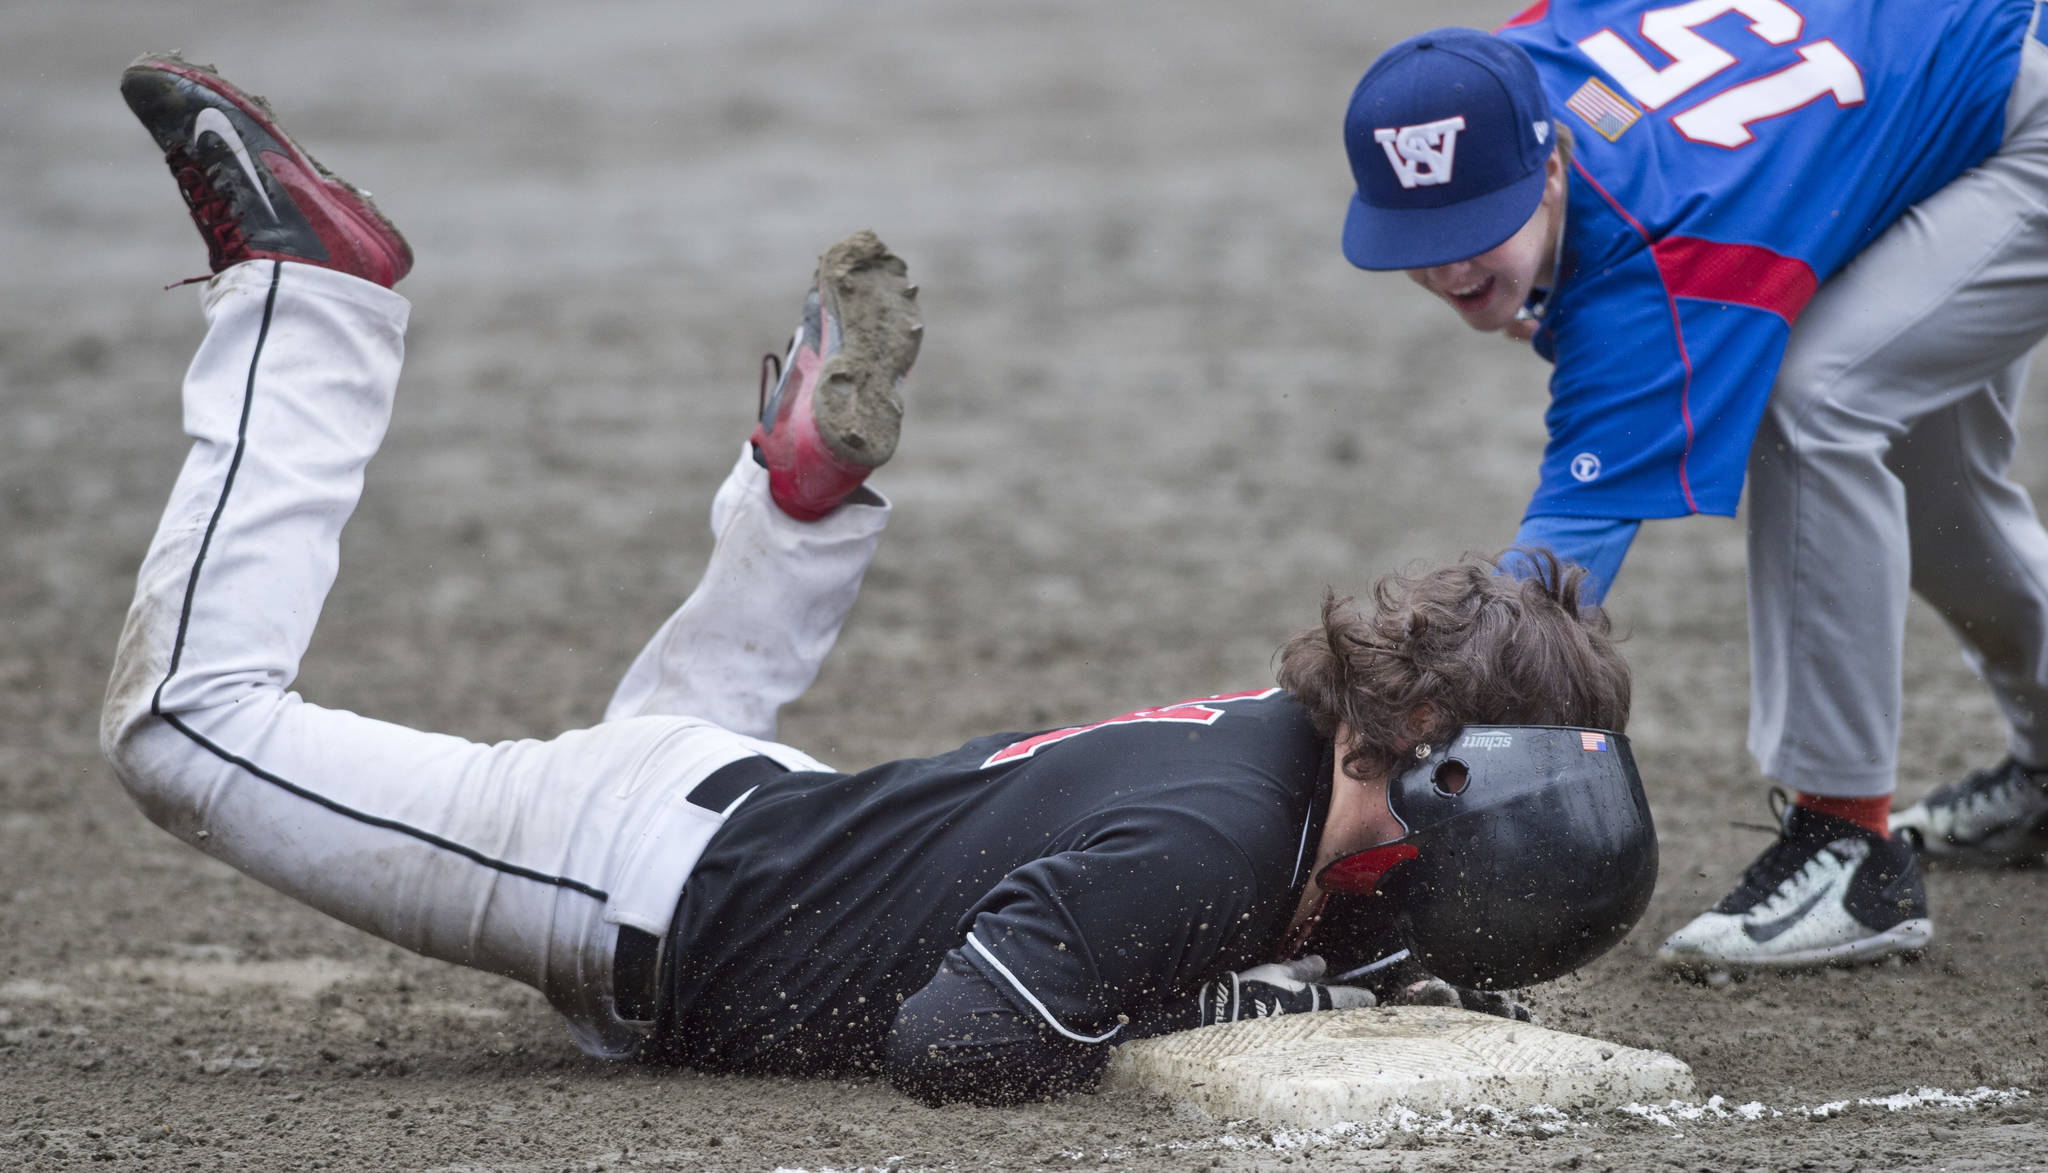 Juneau-Douglas’ Niko Hebert slides safely into third base against Sitka’s Bryce Kelly in the second game of a double-header at Adair-Kennedy Memorial Park on Saturday, May 13, 2017. (Michael Penn | Juneau Empire)